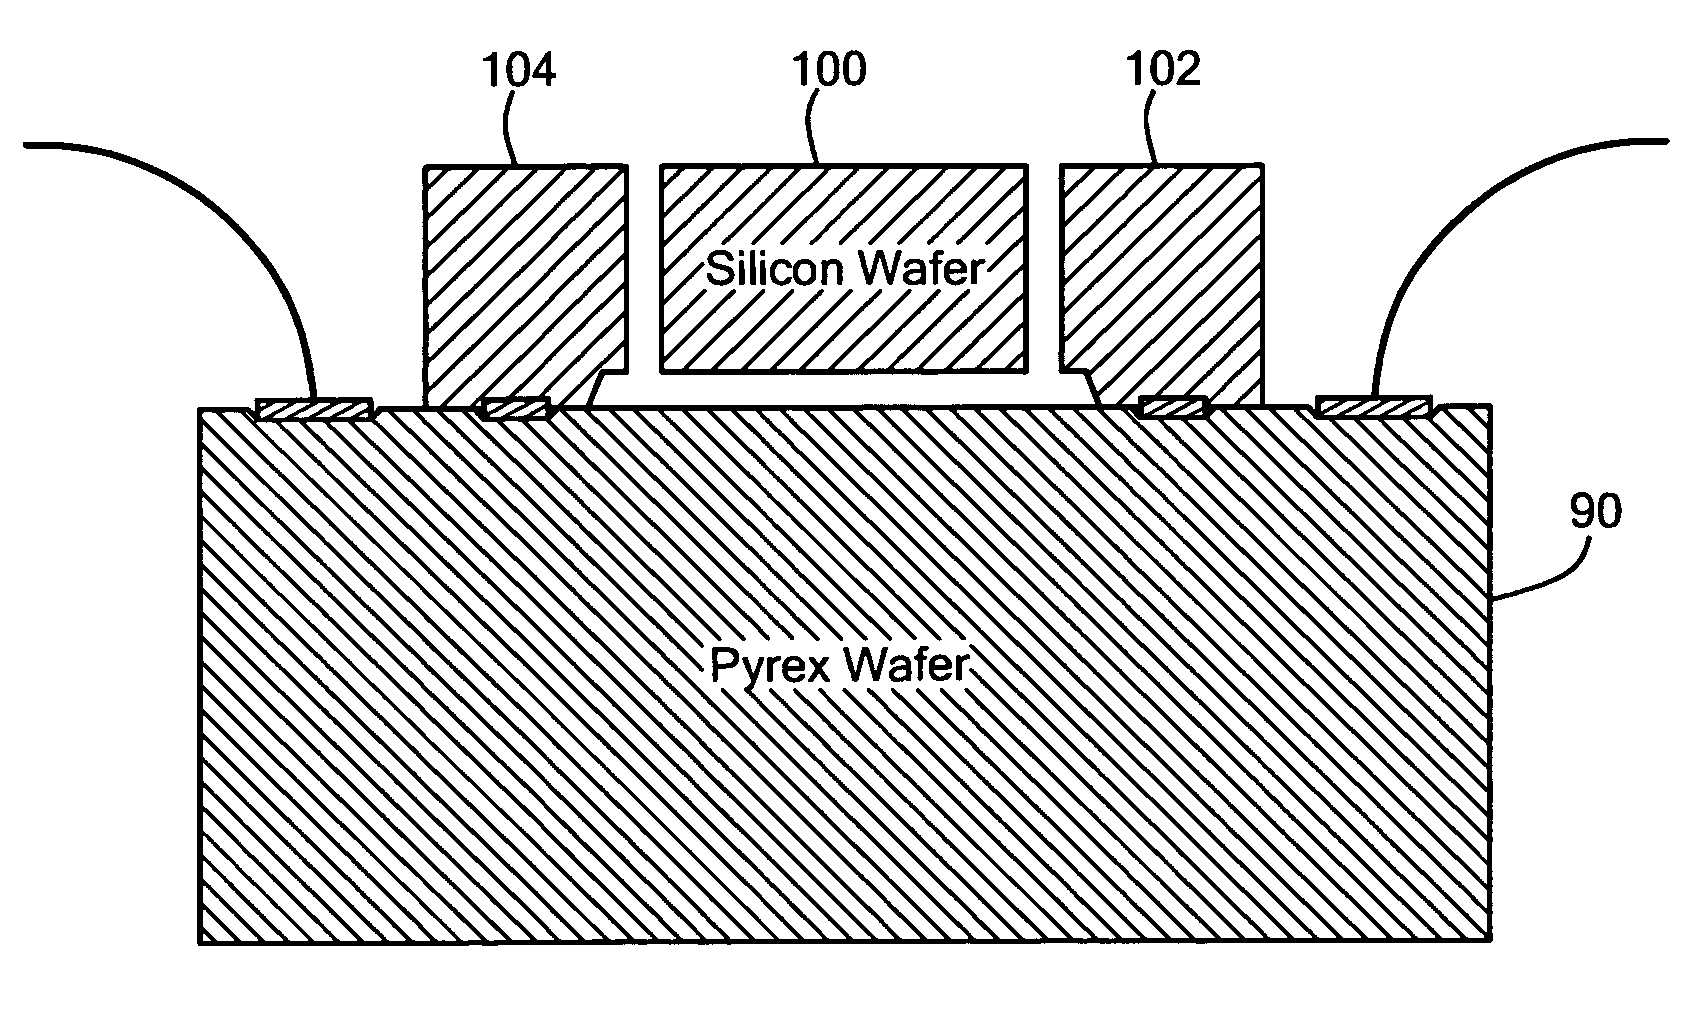 Method for fabricating micro-mechanical devices